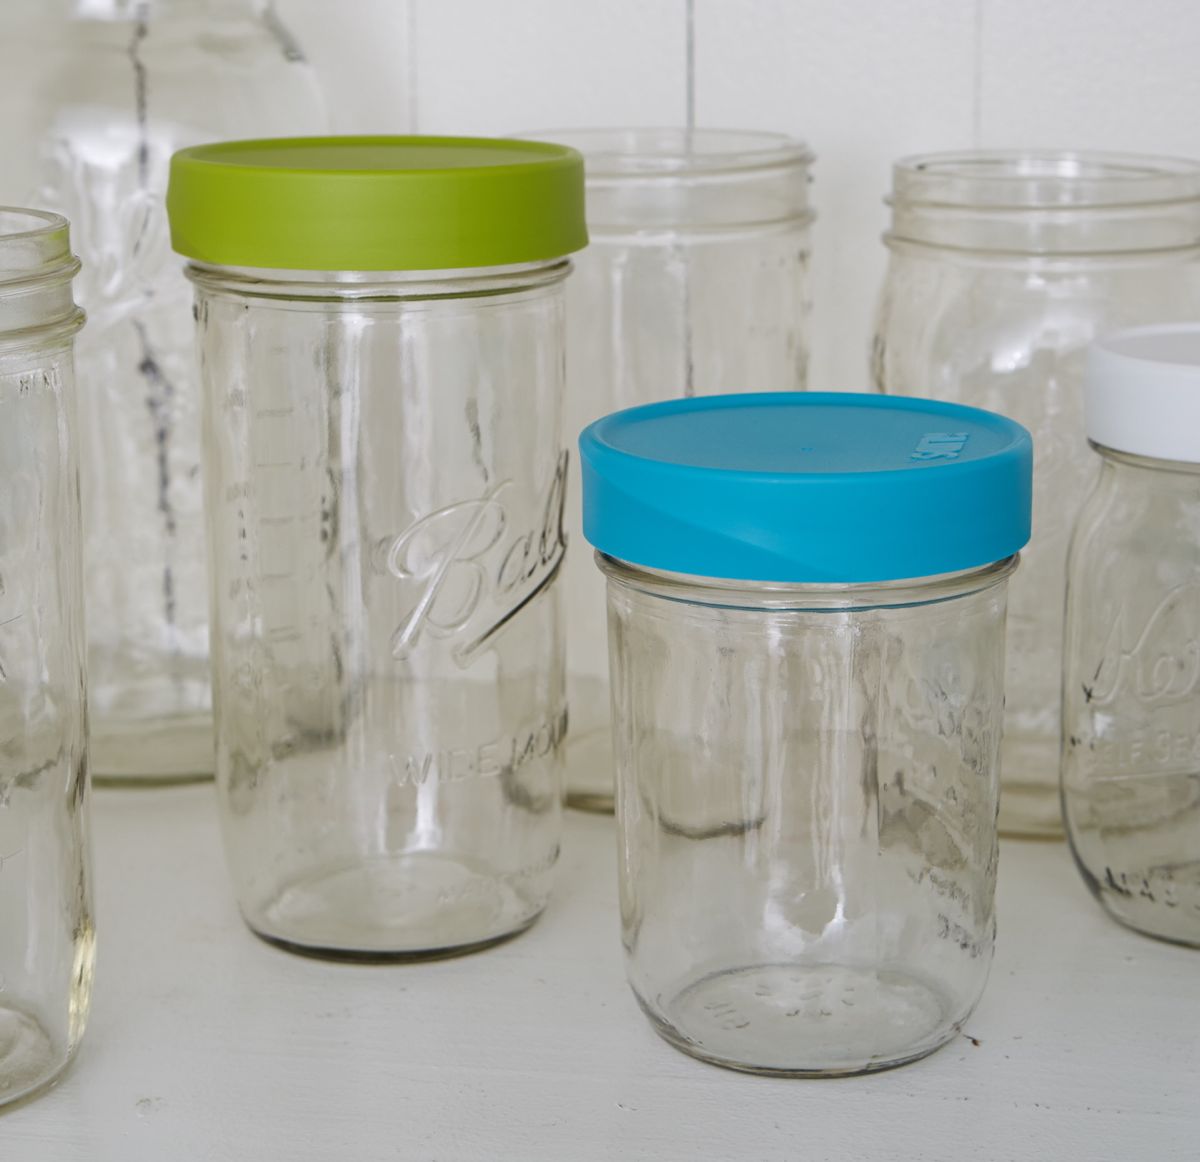 Blue Mason Jar Drinking Glasses With Lids Glasses With Lids 